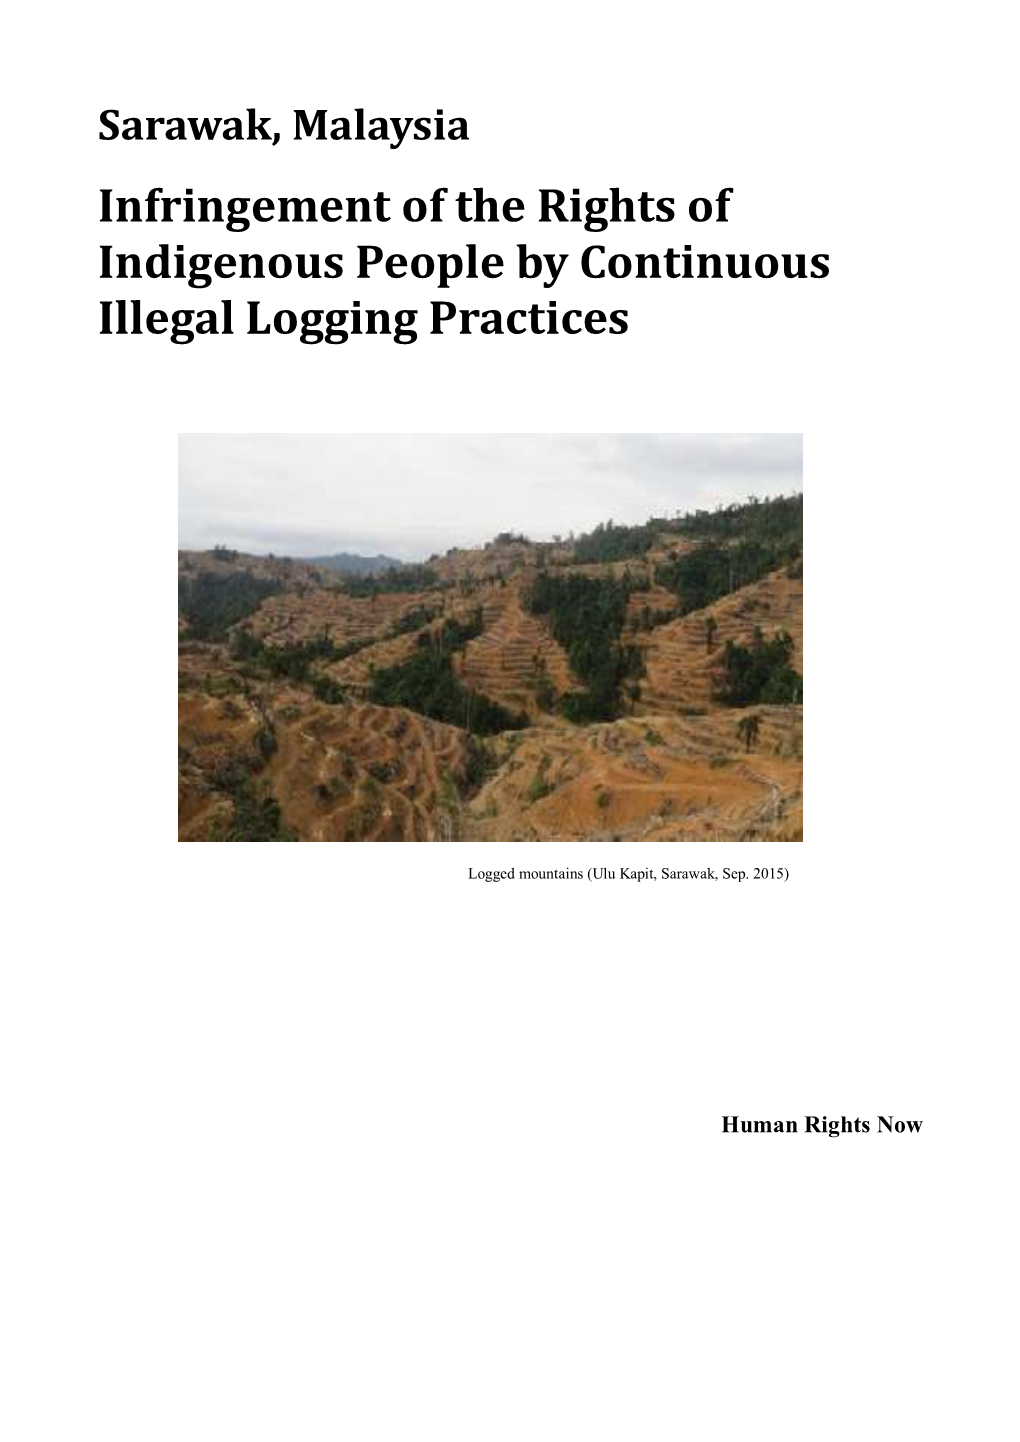 Infringement of the Rights of Indigenous People by Continuous Illegal Logging Practices